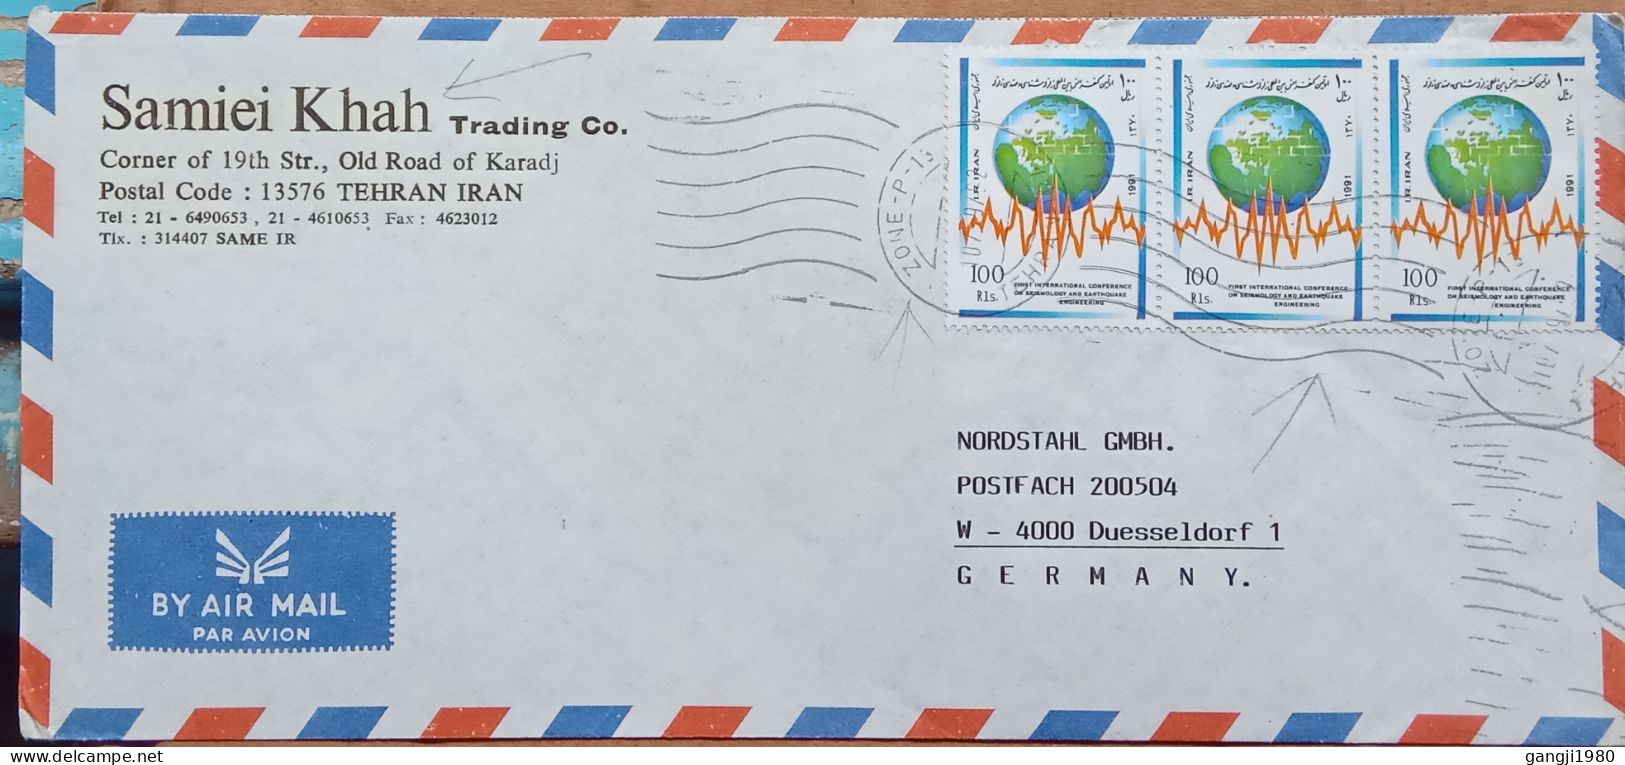 IRAN 1991, ADVERTISING COVER, SAMIEI KHAN, USED TO GERMANY, INT CONFERENCE ON EARTHQUAKE, 3 MULTI STAMP, ZONE-P-13 TEHRA - Iran